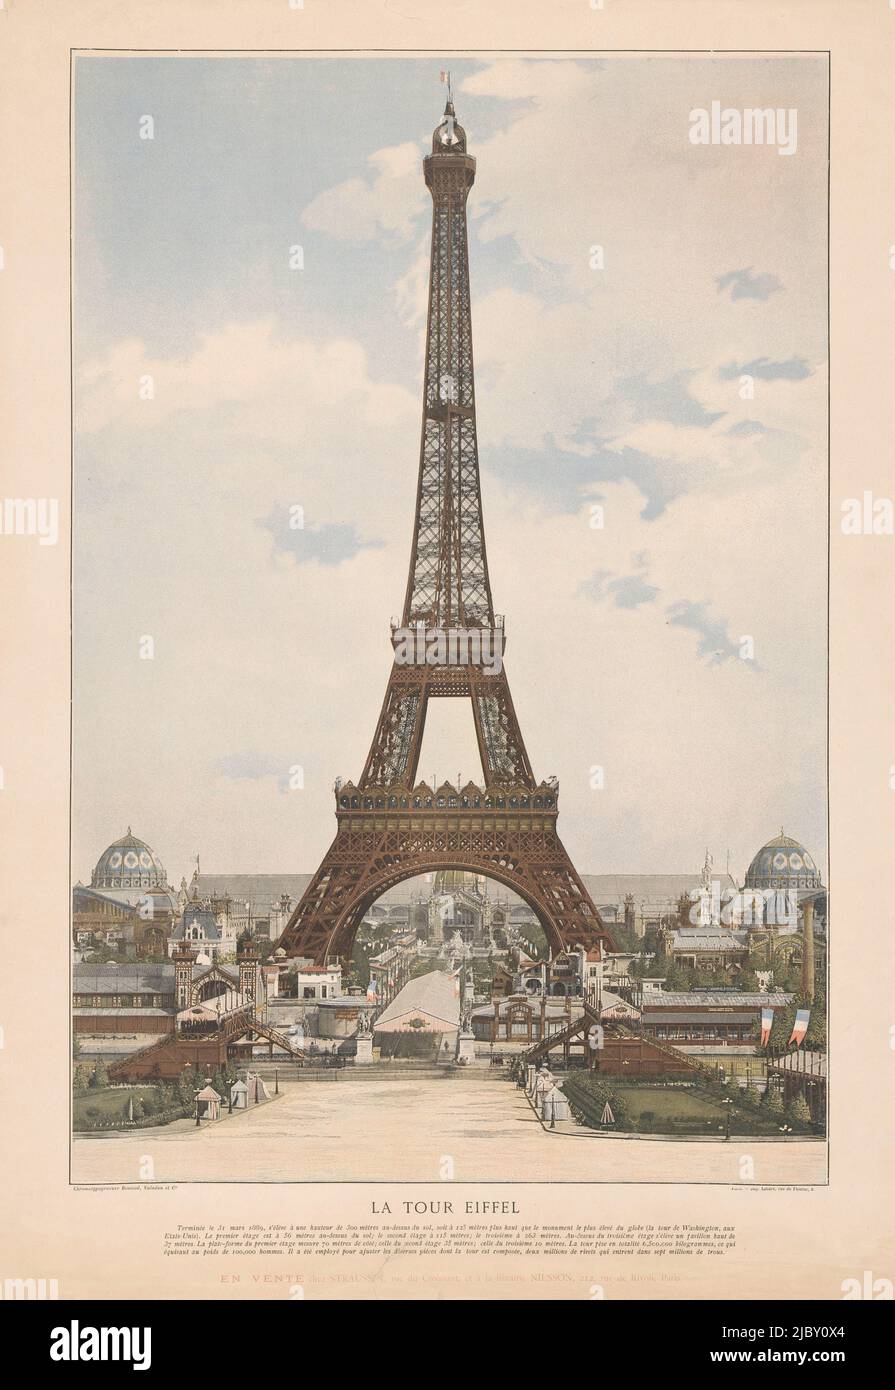 View of the Eiffel Tower La Tour Eiffel finished on 31 March 1889, at an  altitude of 300 metres (...), print maker: anonymous, printer: Lahure,  (mentioned on object), publisher: Valadon & Cie.